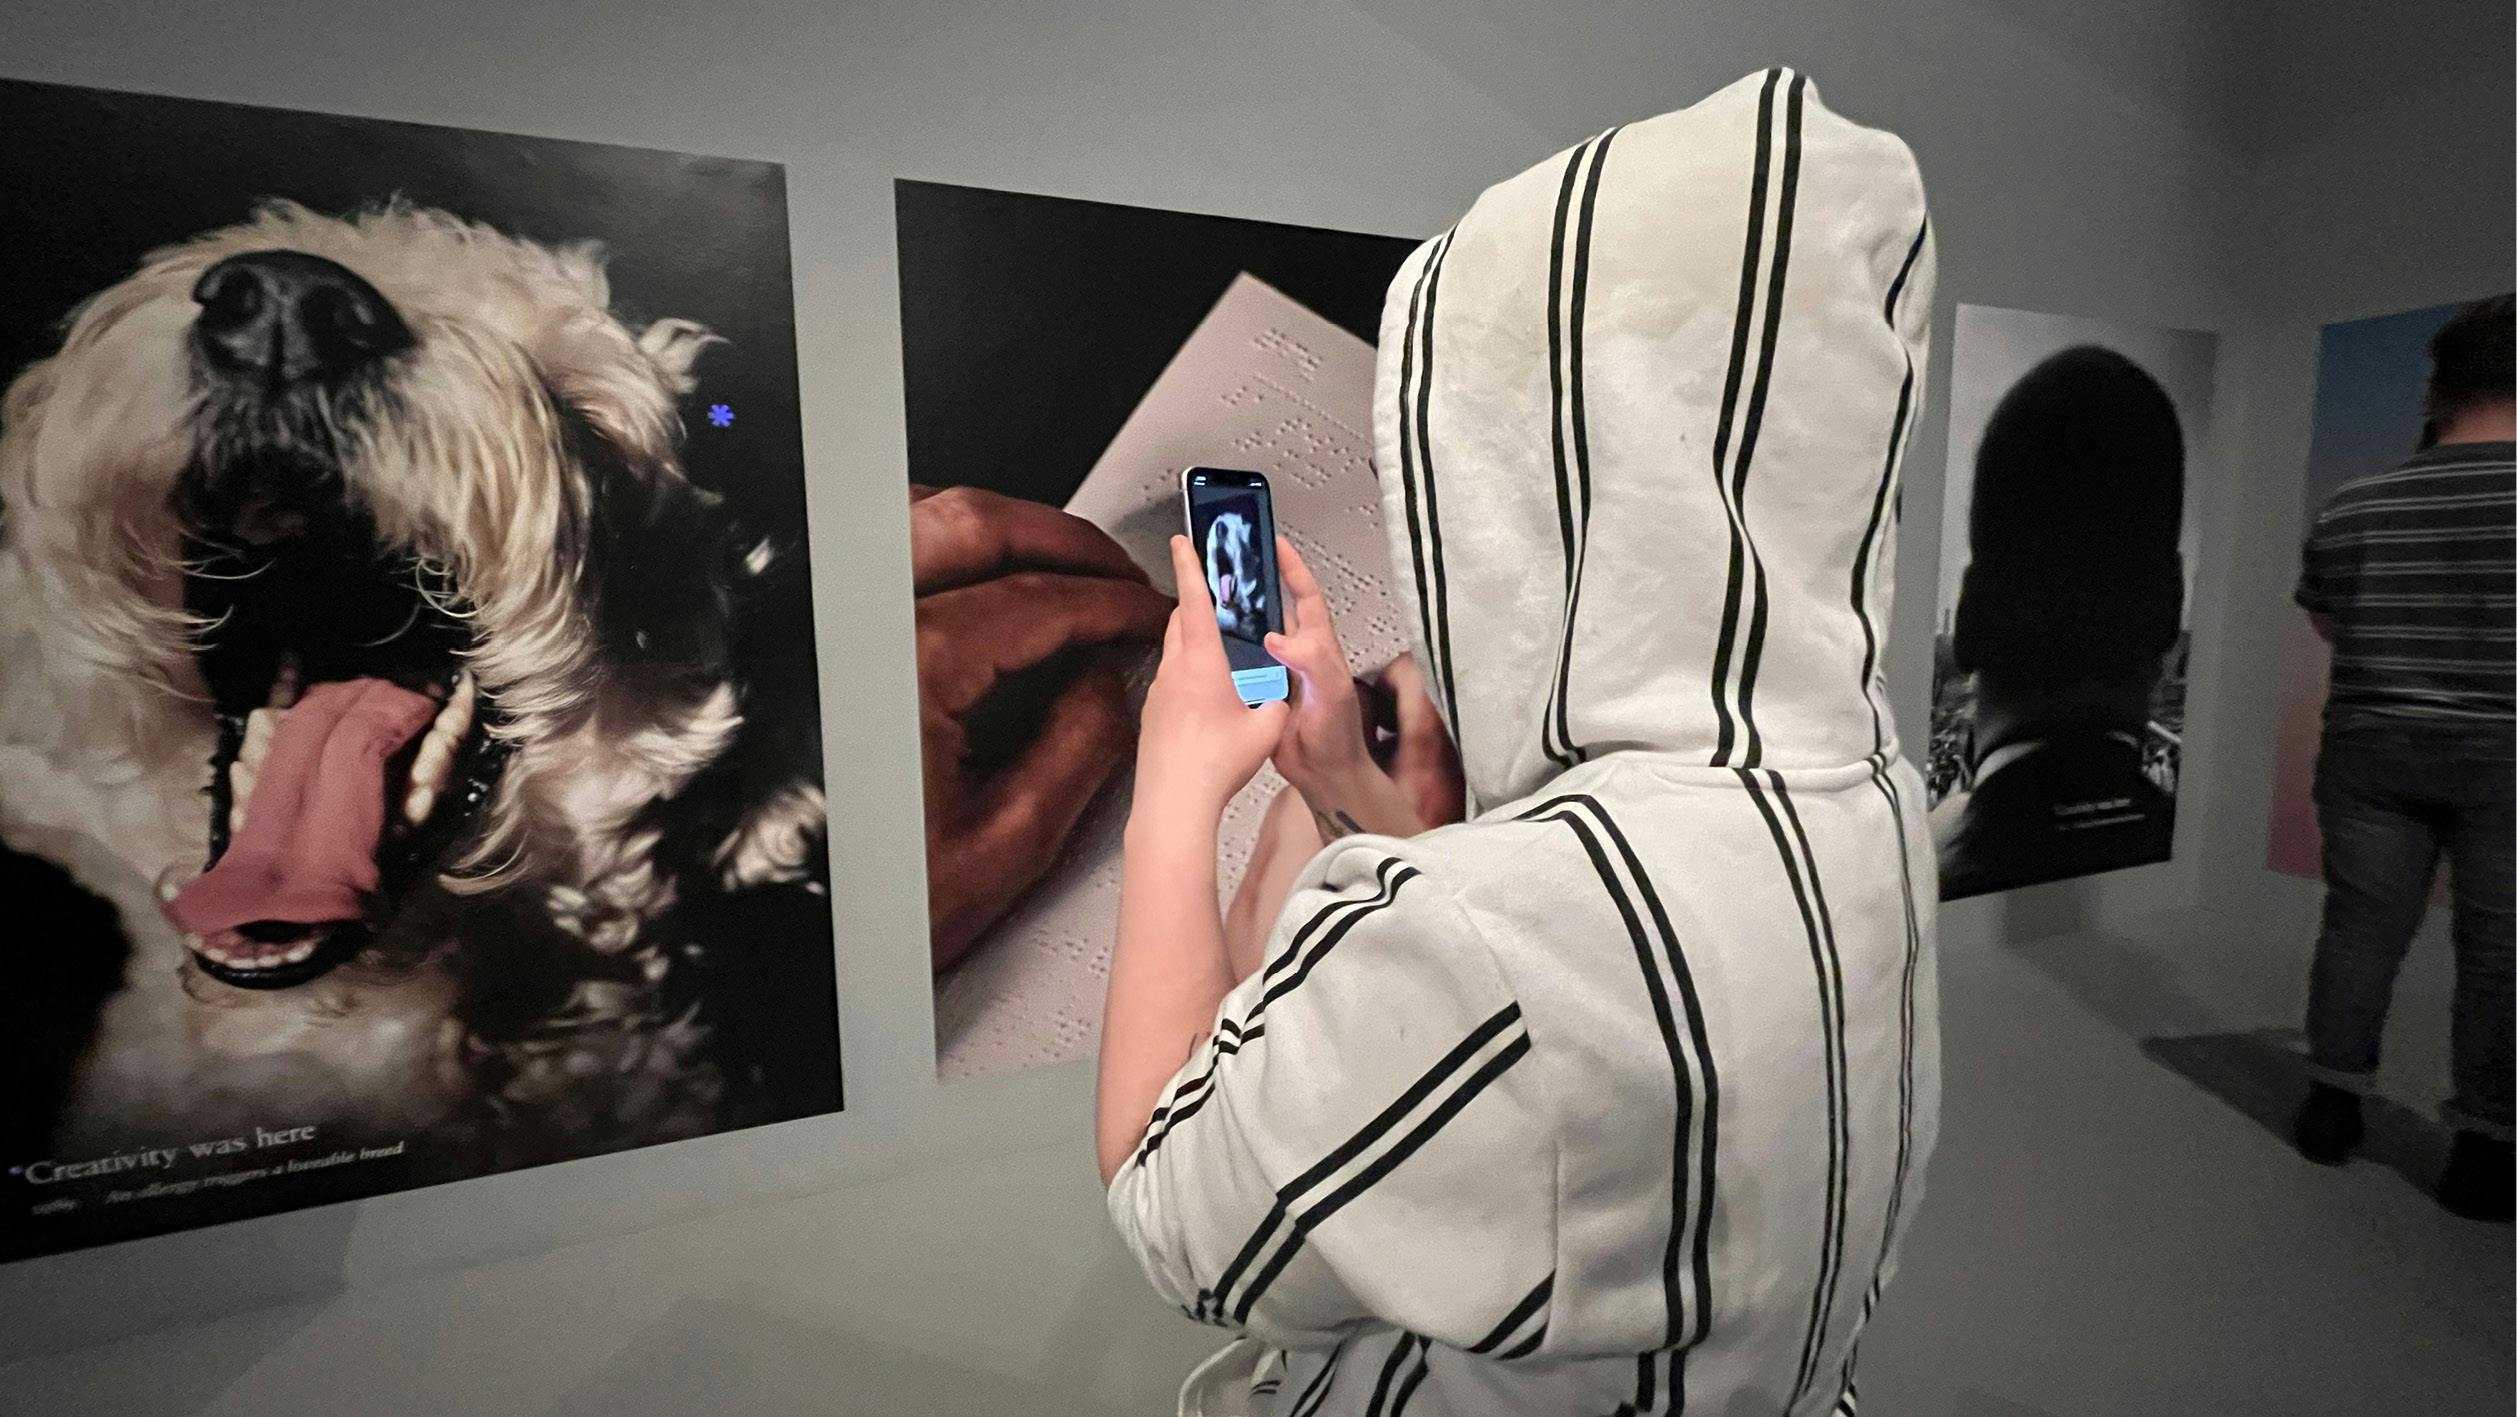 Student taking a photo of a picture of a dog hung on the wall